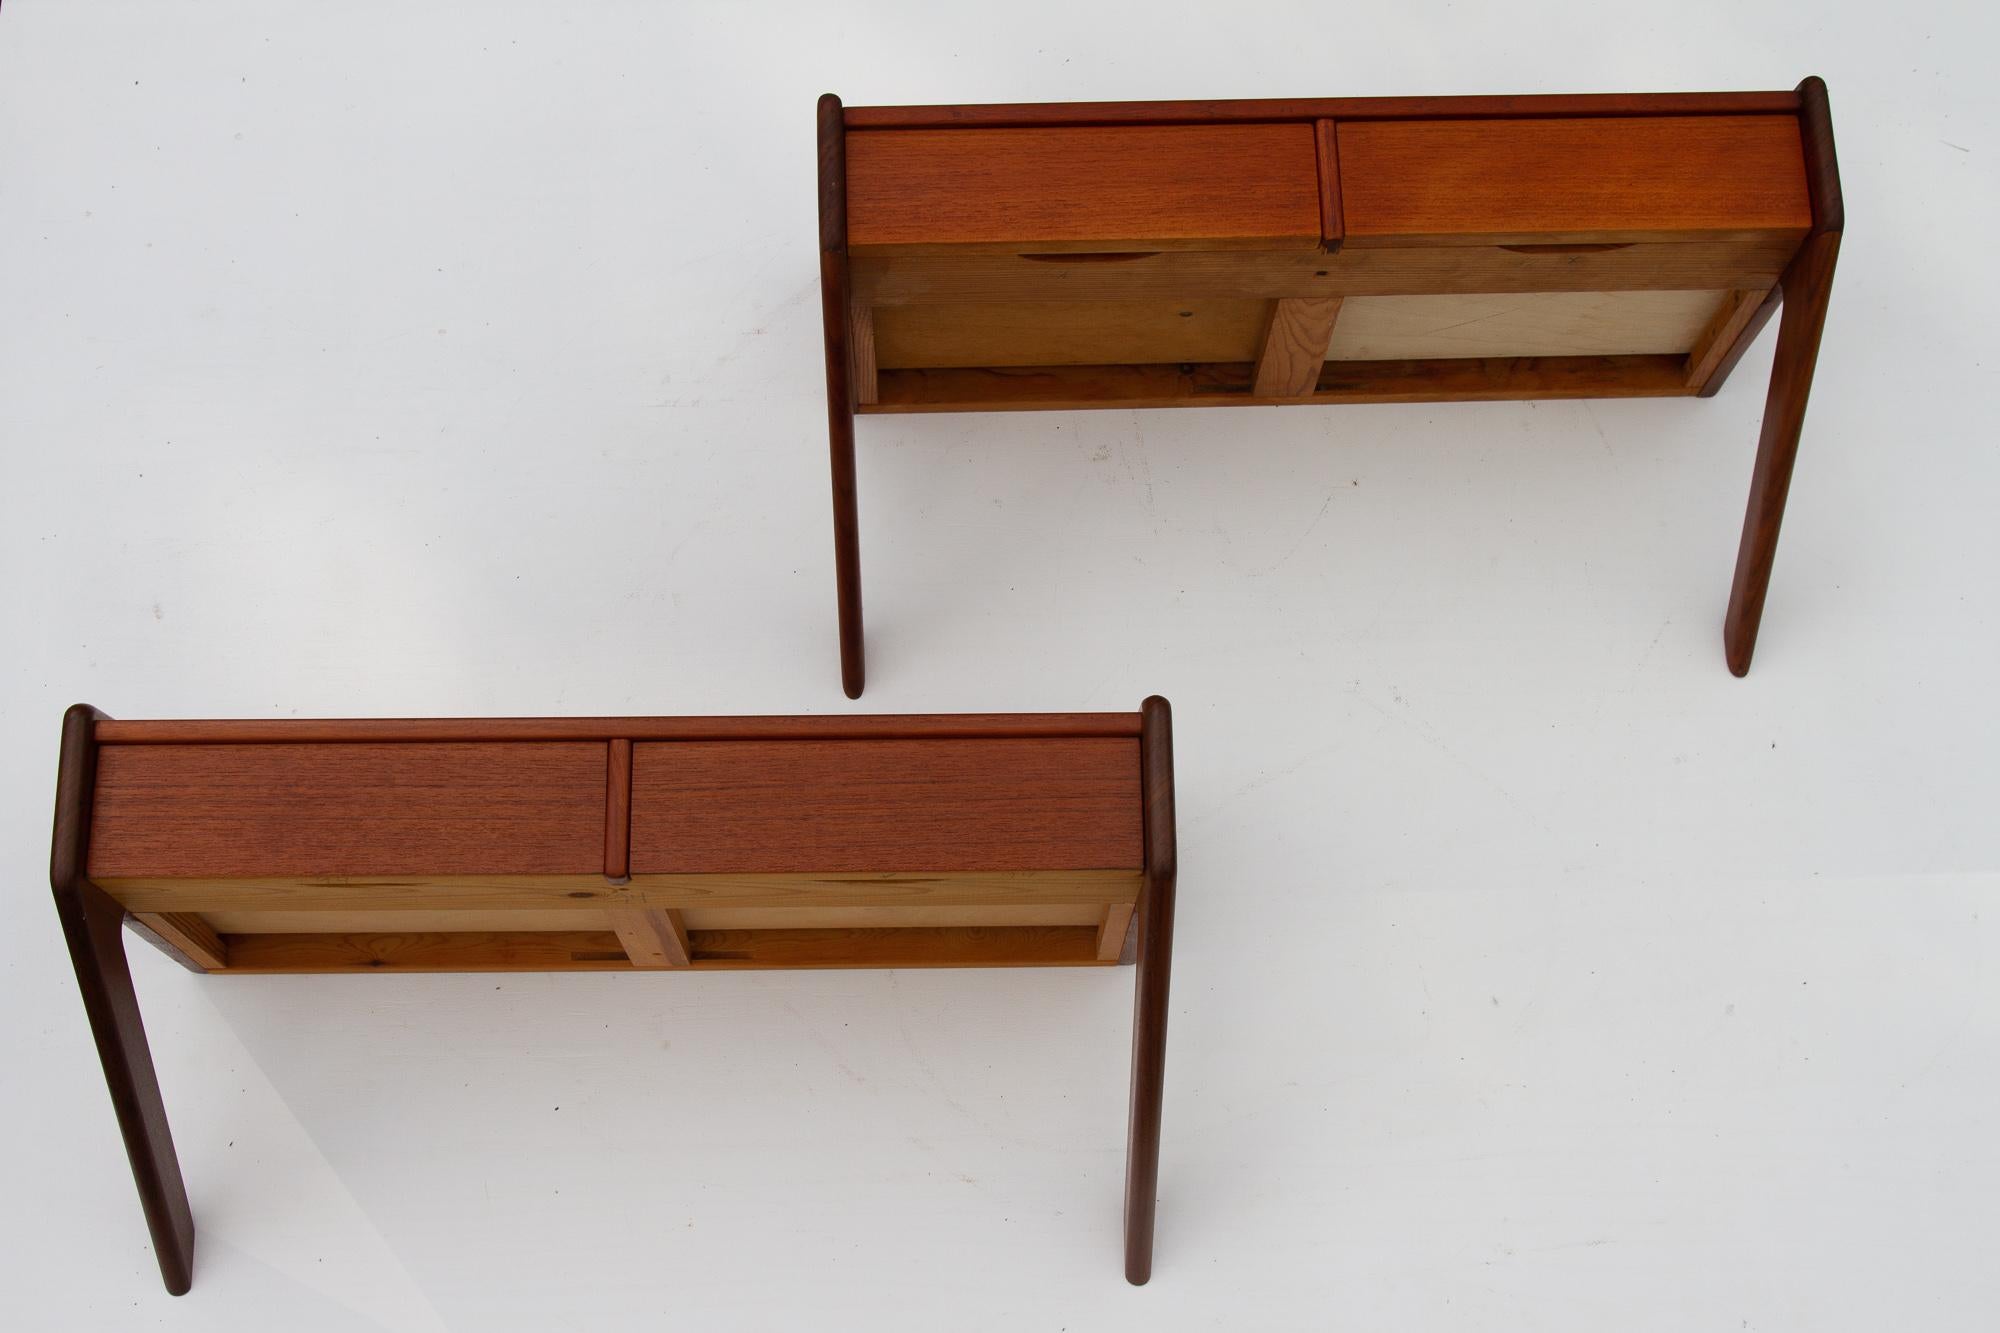 Pair of vintage Danish bedside tables by Ølhom, 1960s
Set of two beautiful wall mounted / floating bed side tables with two drawers designed by Danish designer Sigfred Omann and manufactured by Ølhom Møbelfabrik, Denmark.
High quality